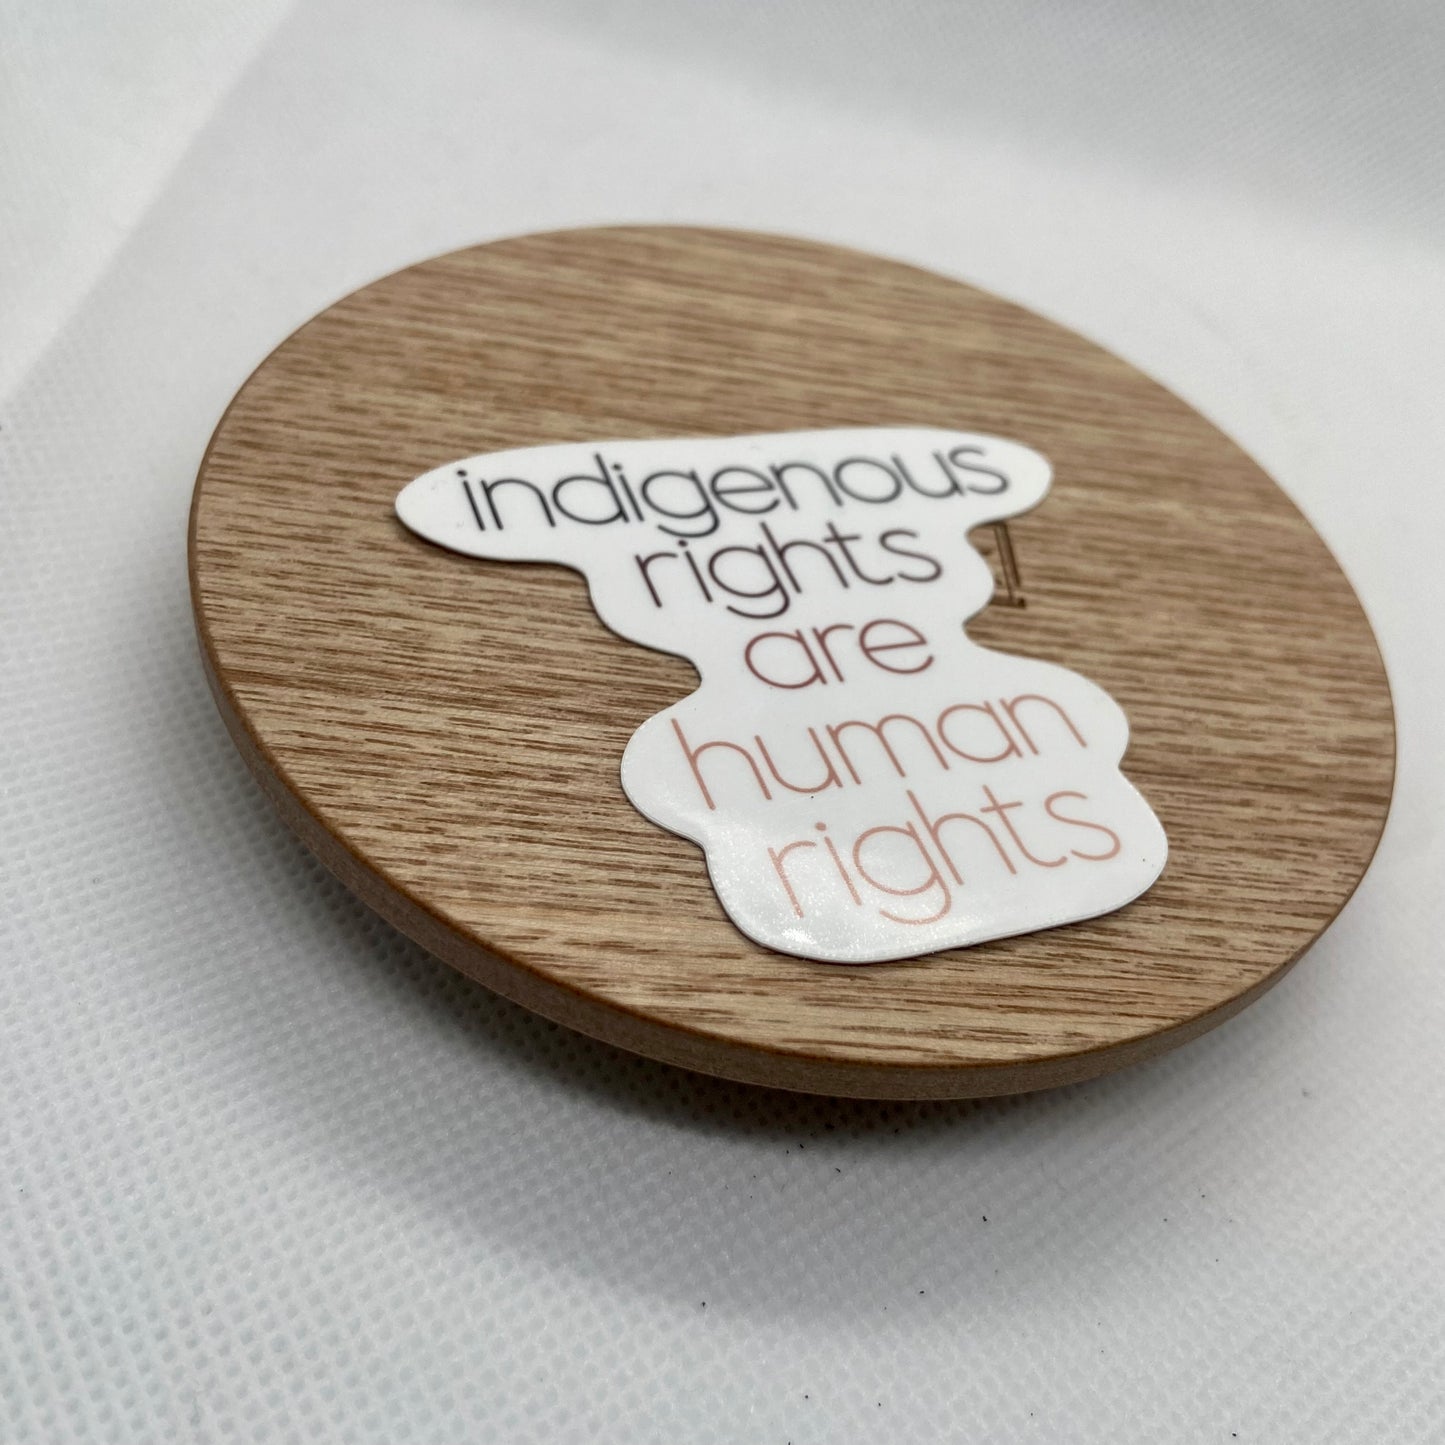 indigenous rights are human rights - vinyl sticker